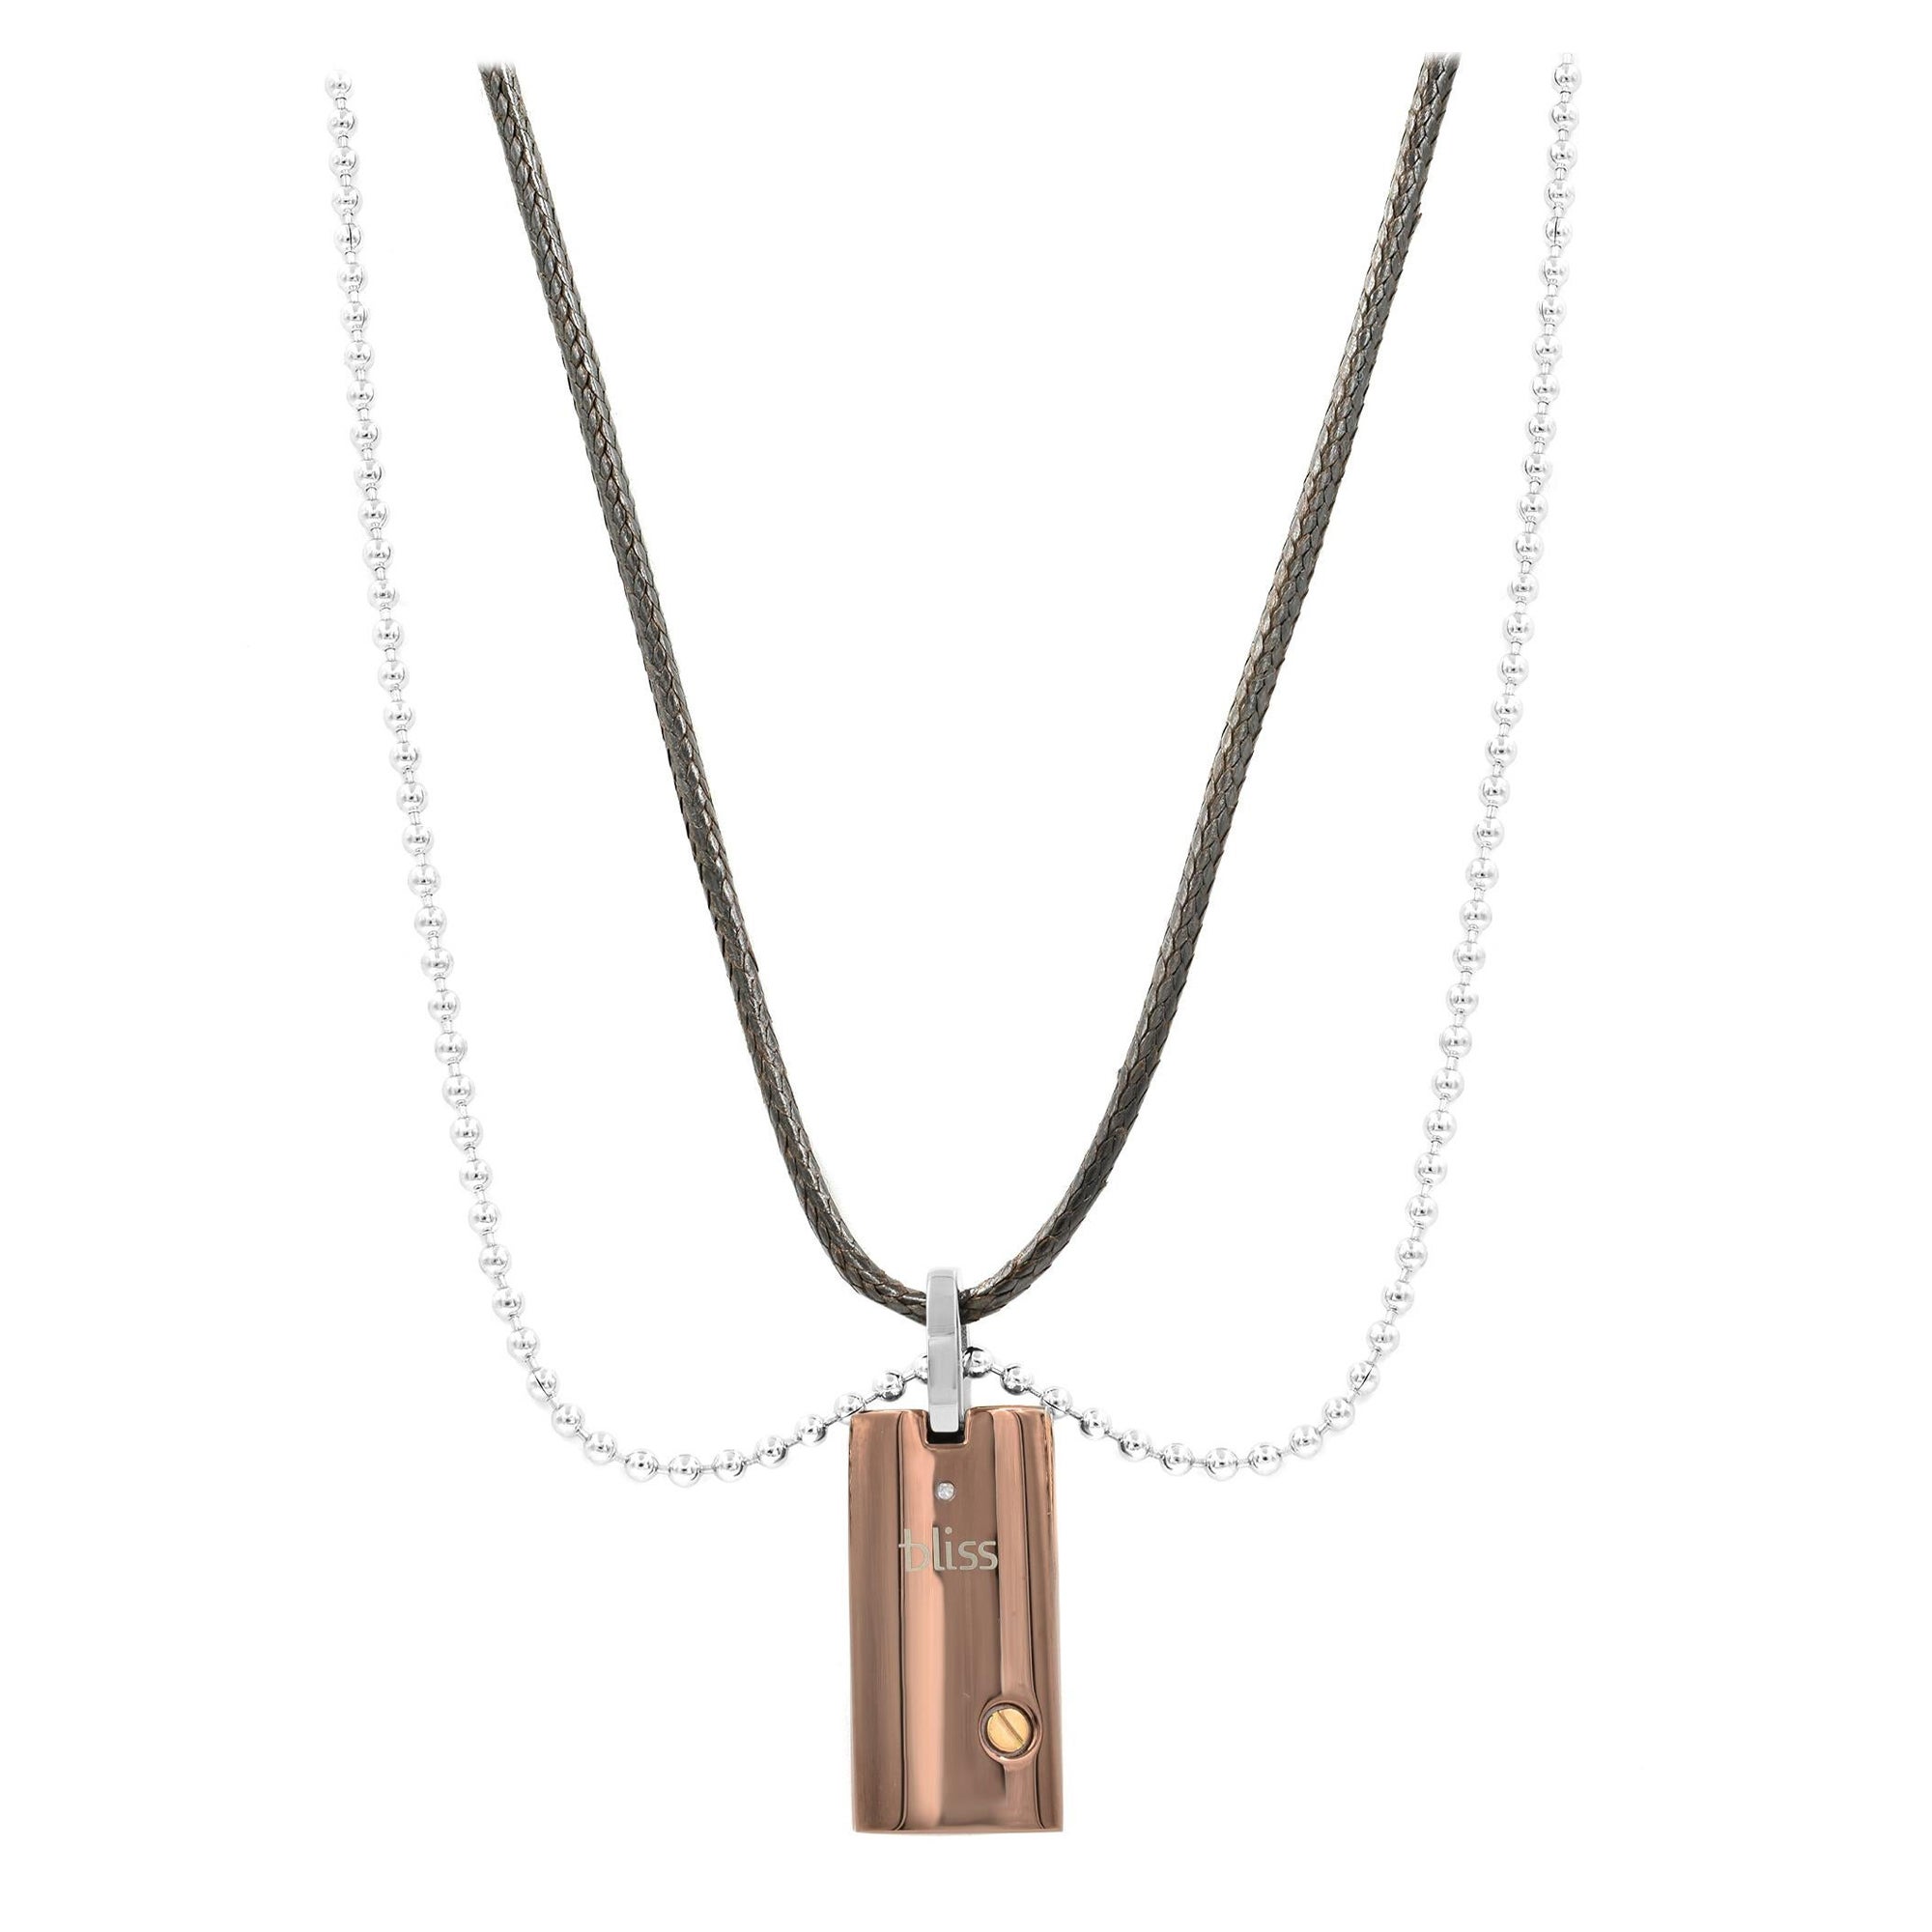 Bliss by Damiani Uomo Diamond Pendant Necklace Brown Stainless Steel 18K Gold